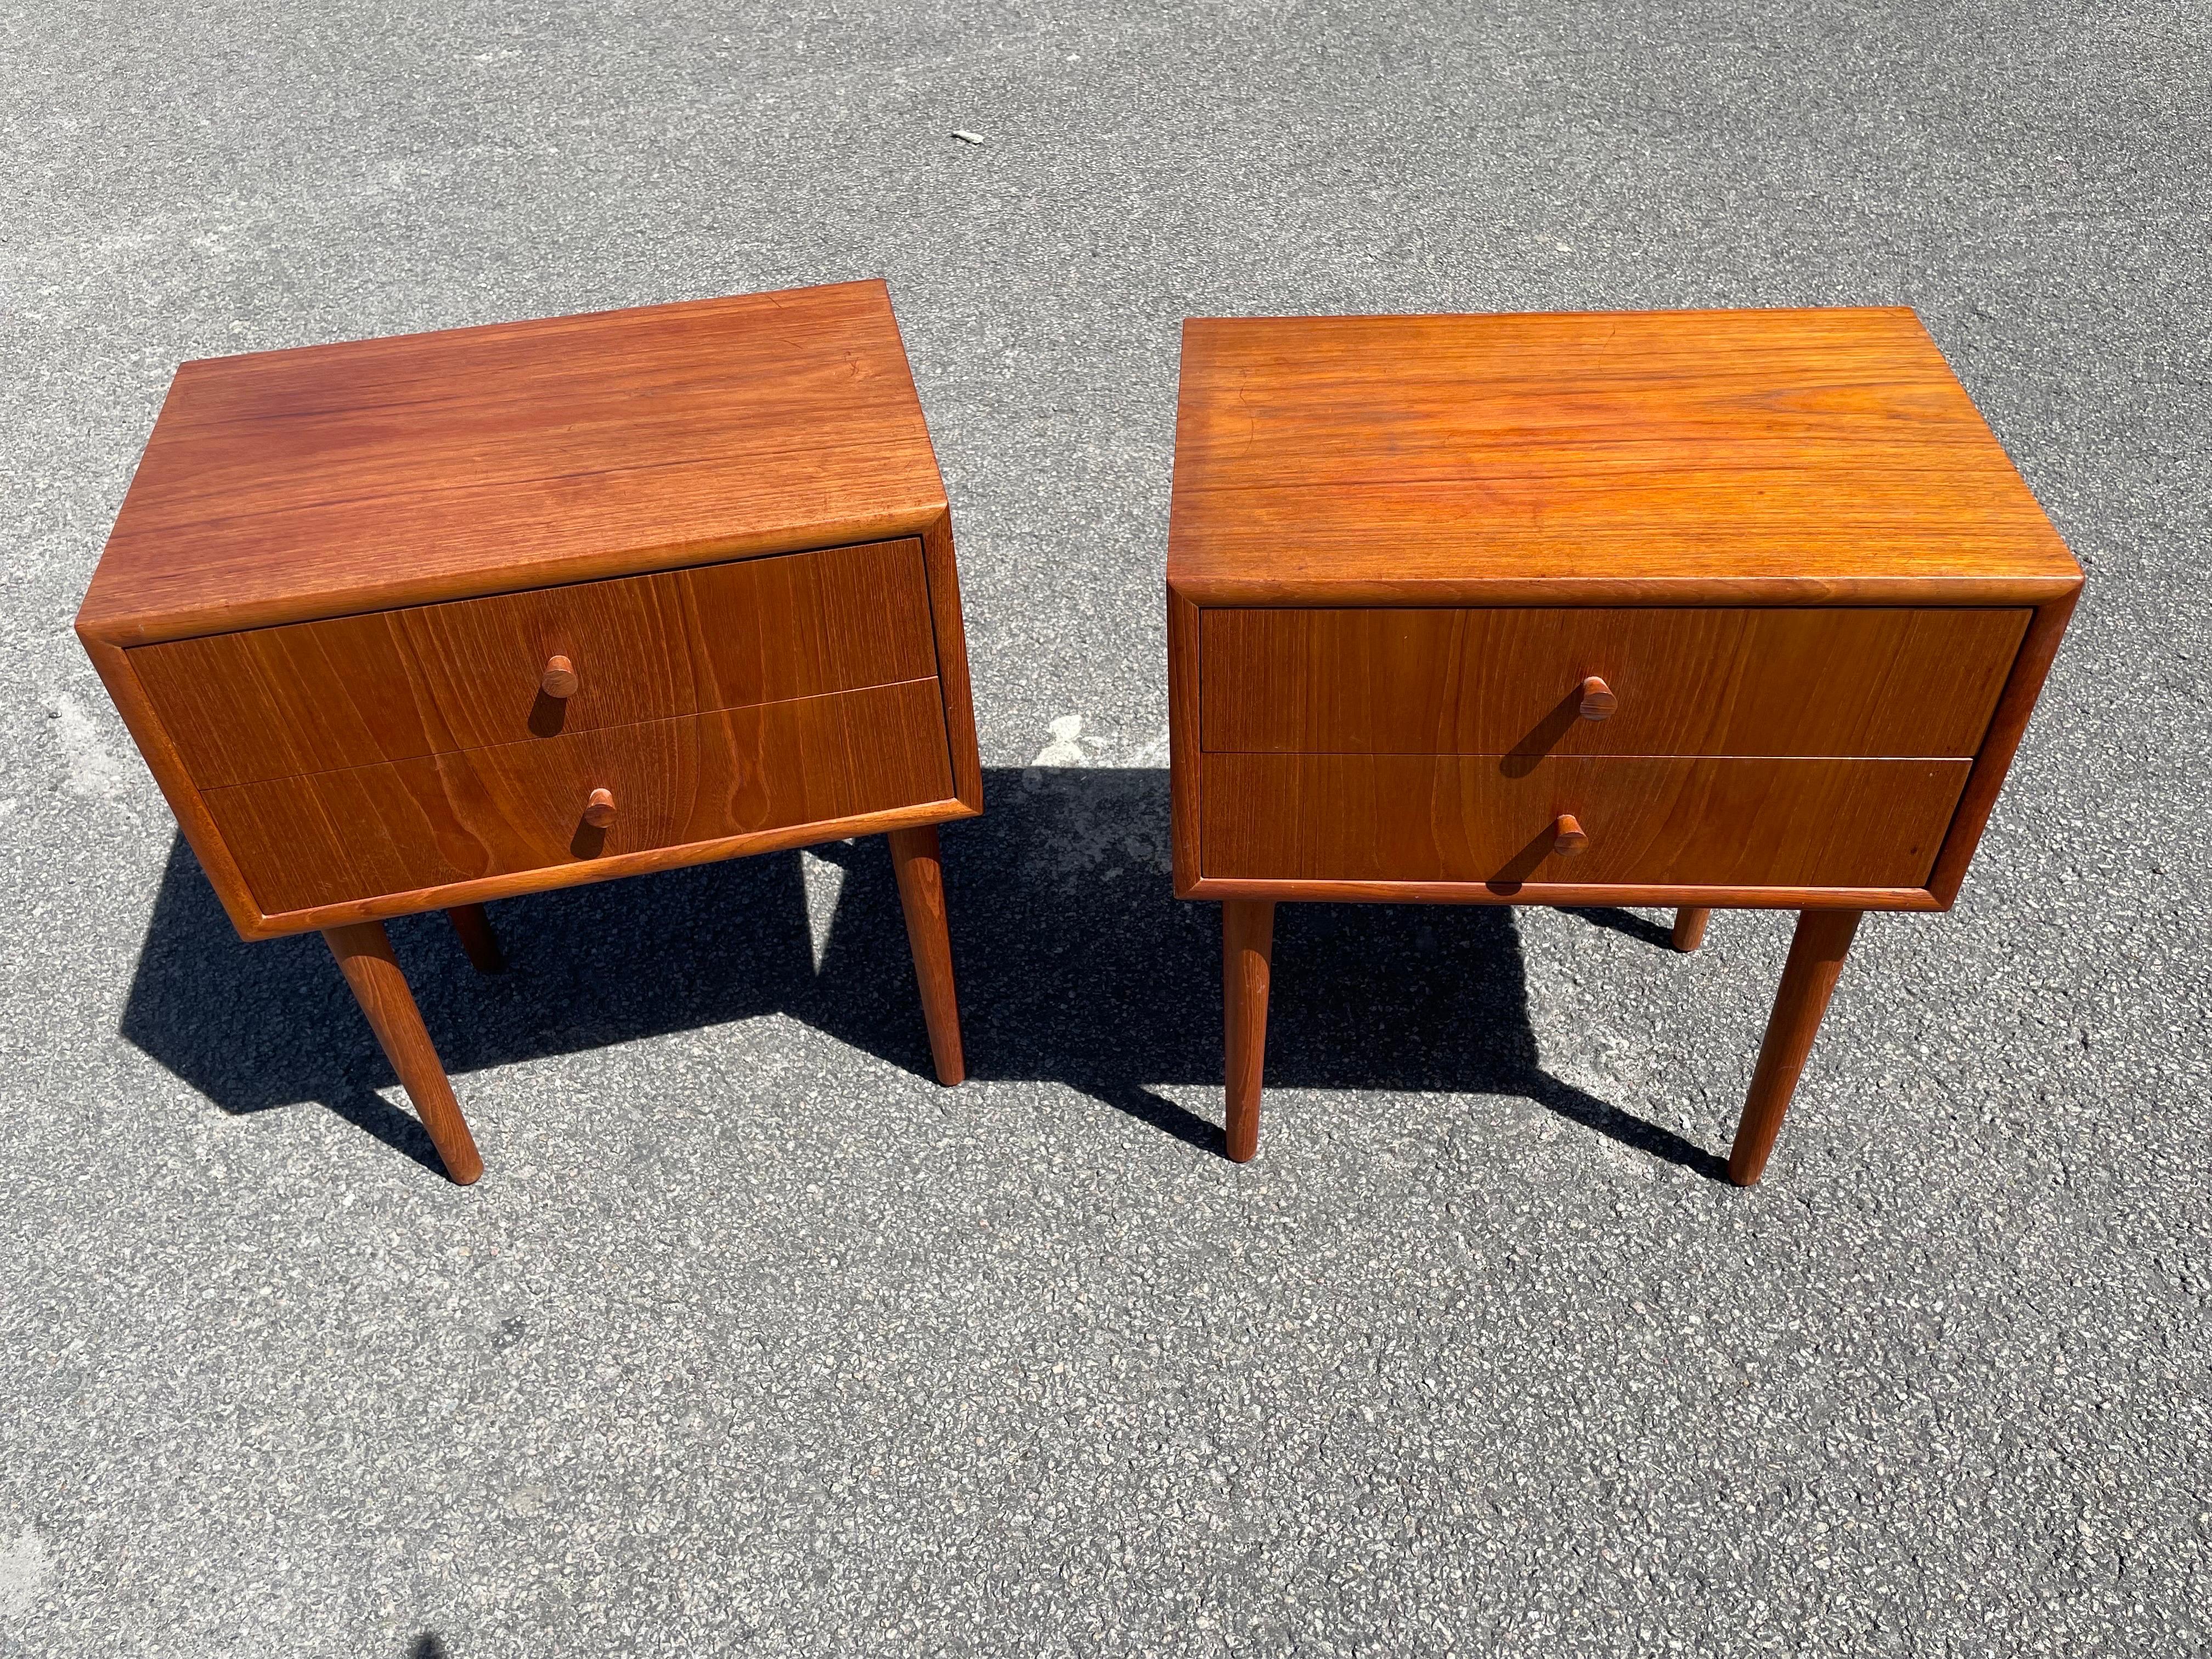 A set of teak nightstands with spacious drawers. Straight up high quality Danish design from the 1960´s. Practical and smooth. Well preserved vintage bedsidetables from the golden age of scandinavian design.